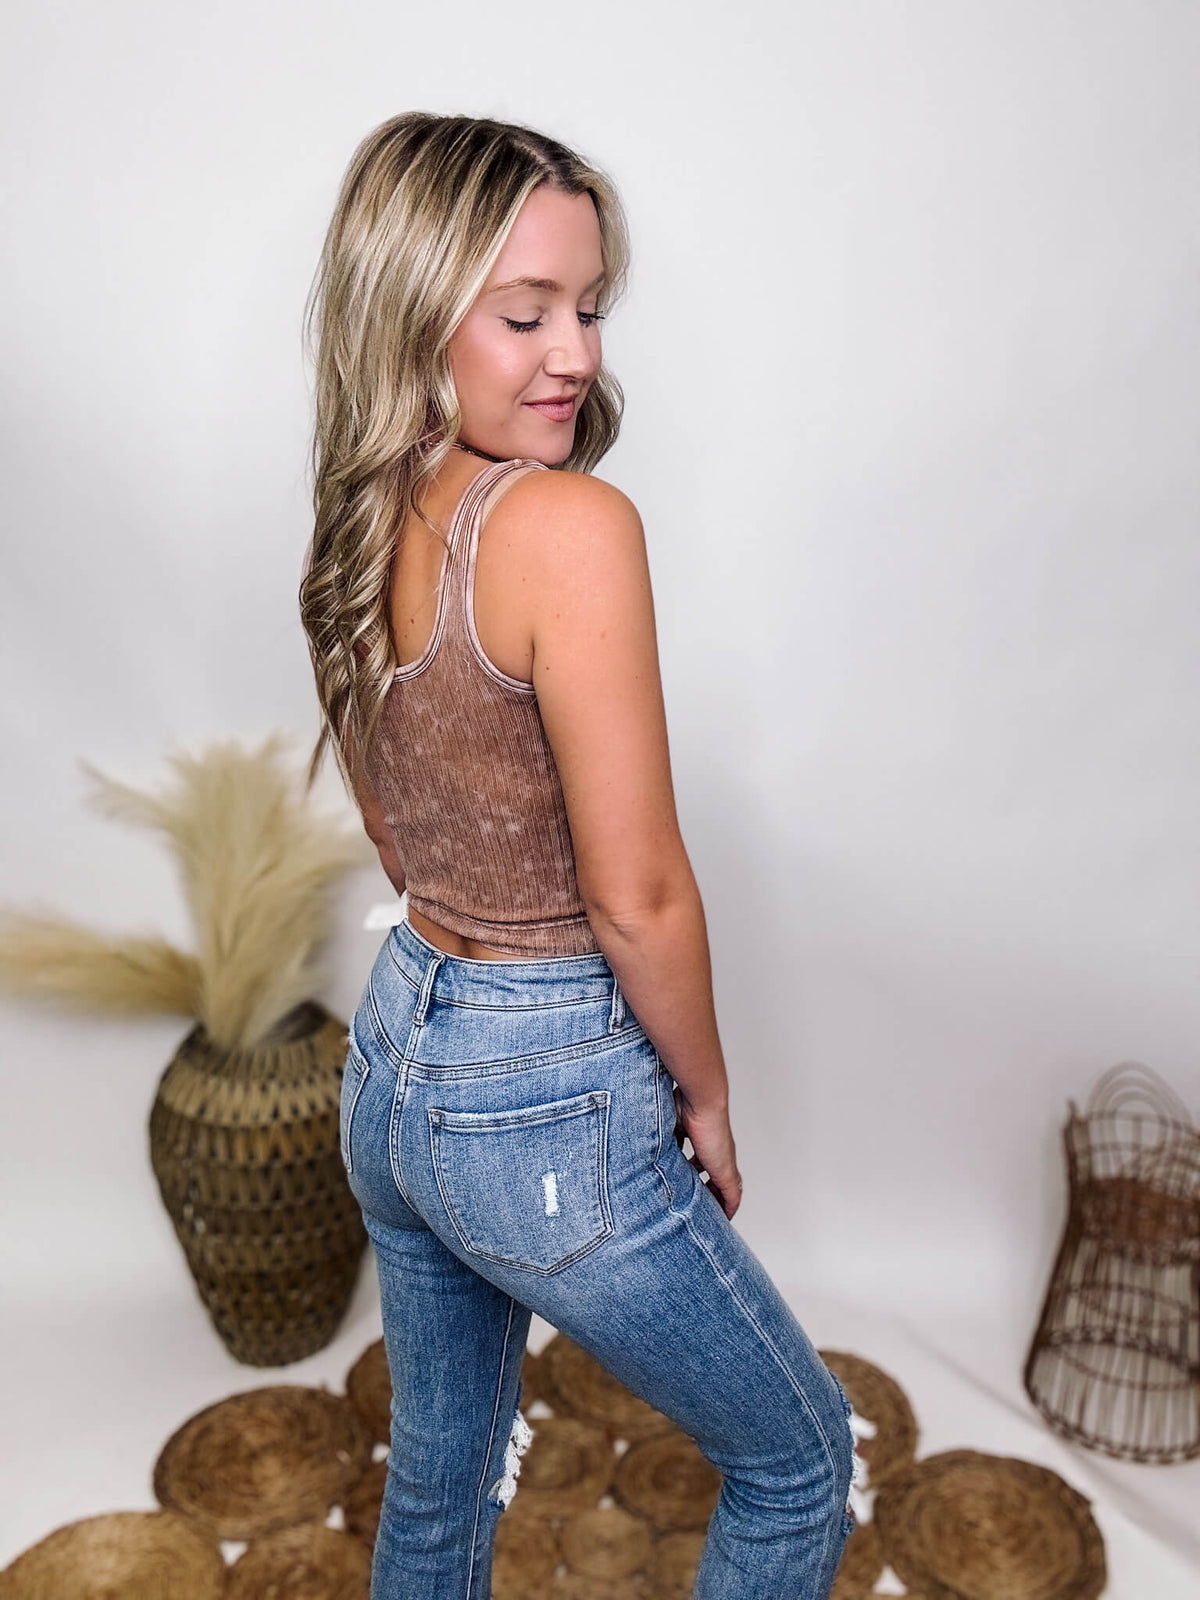 Zenana Deep Camel Mineral Washed Crop Tank Top Ribbed V-Neck or Square Neck Fitted and Stretchy 90% Nylon, 10% Spandex **Each item is unique due to the mineral wash